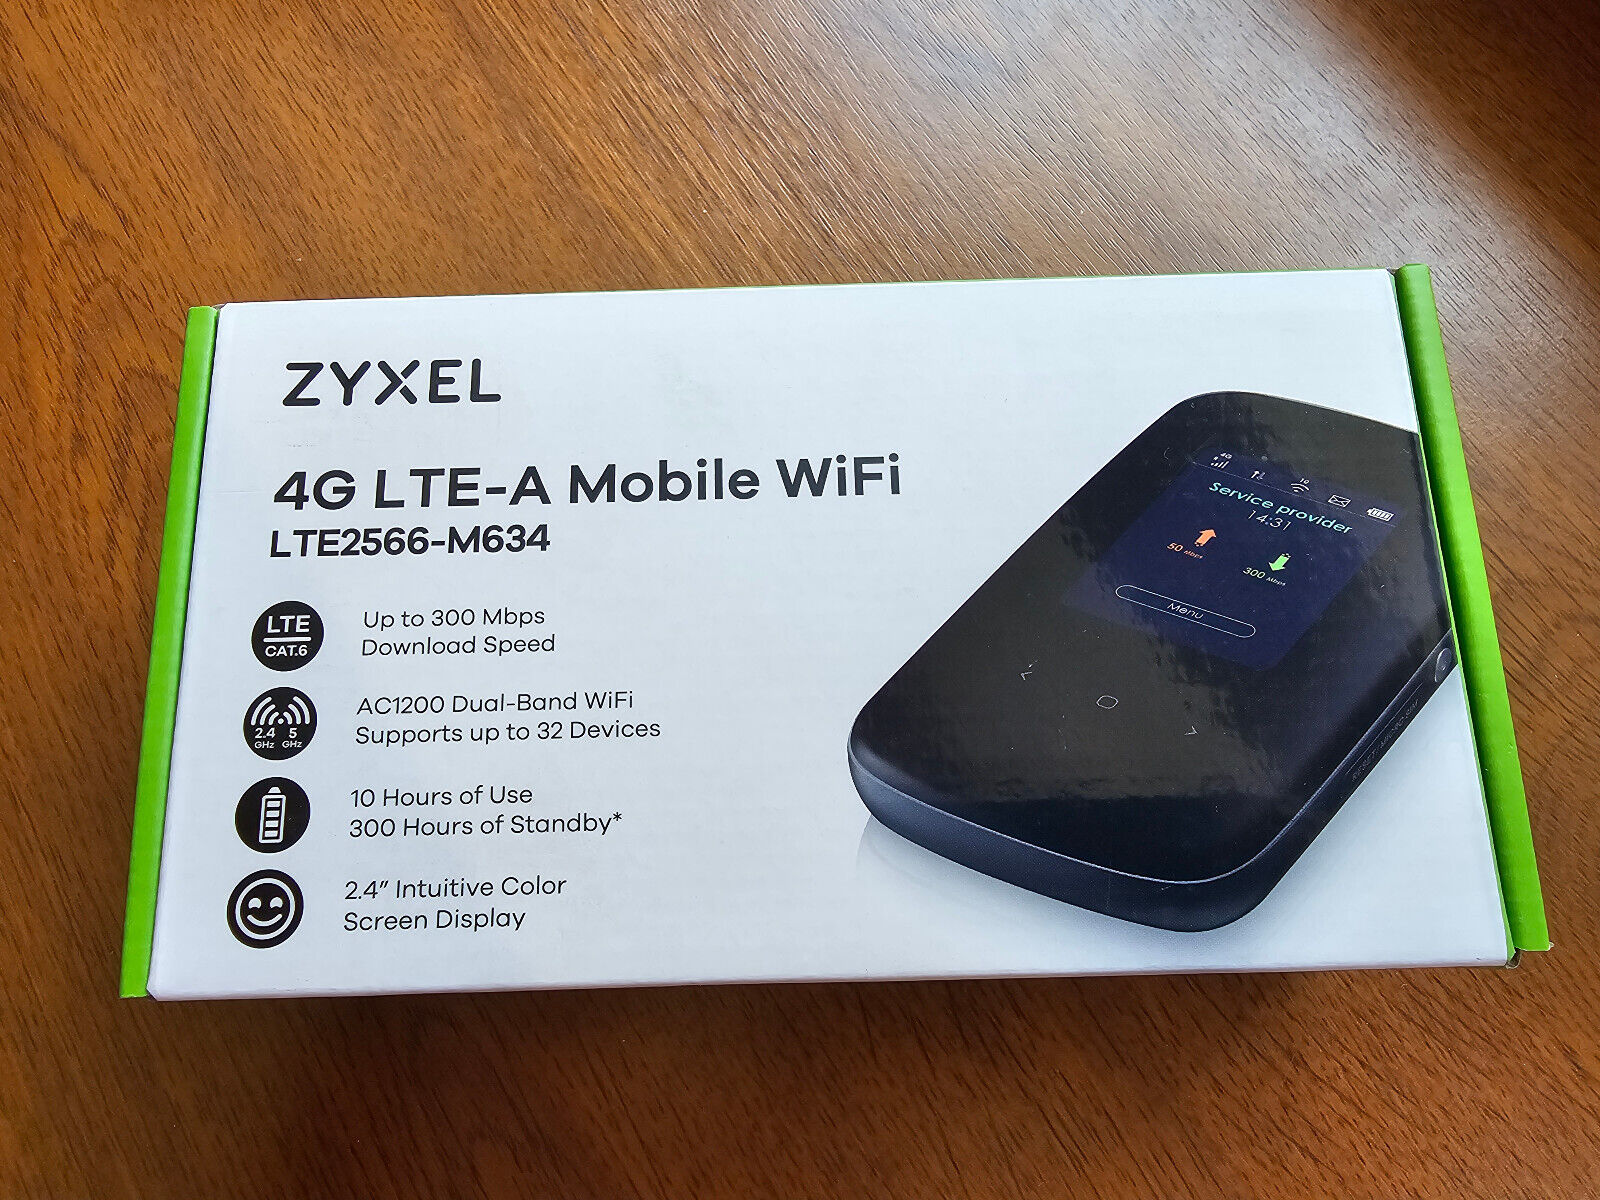 ZyXEL Wireless router Portable LTE2566-M634 4G LTE-A